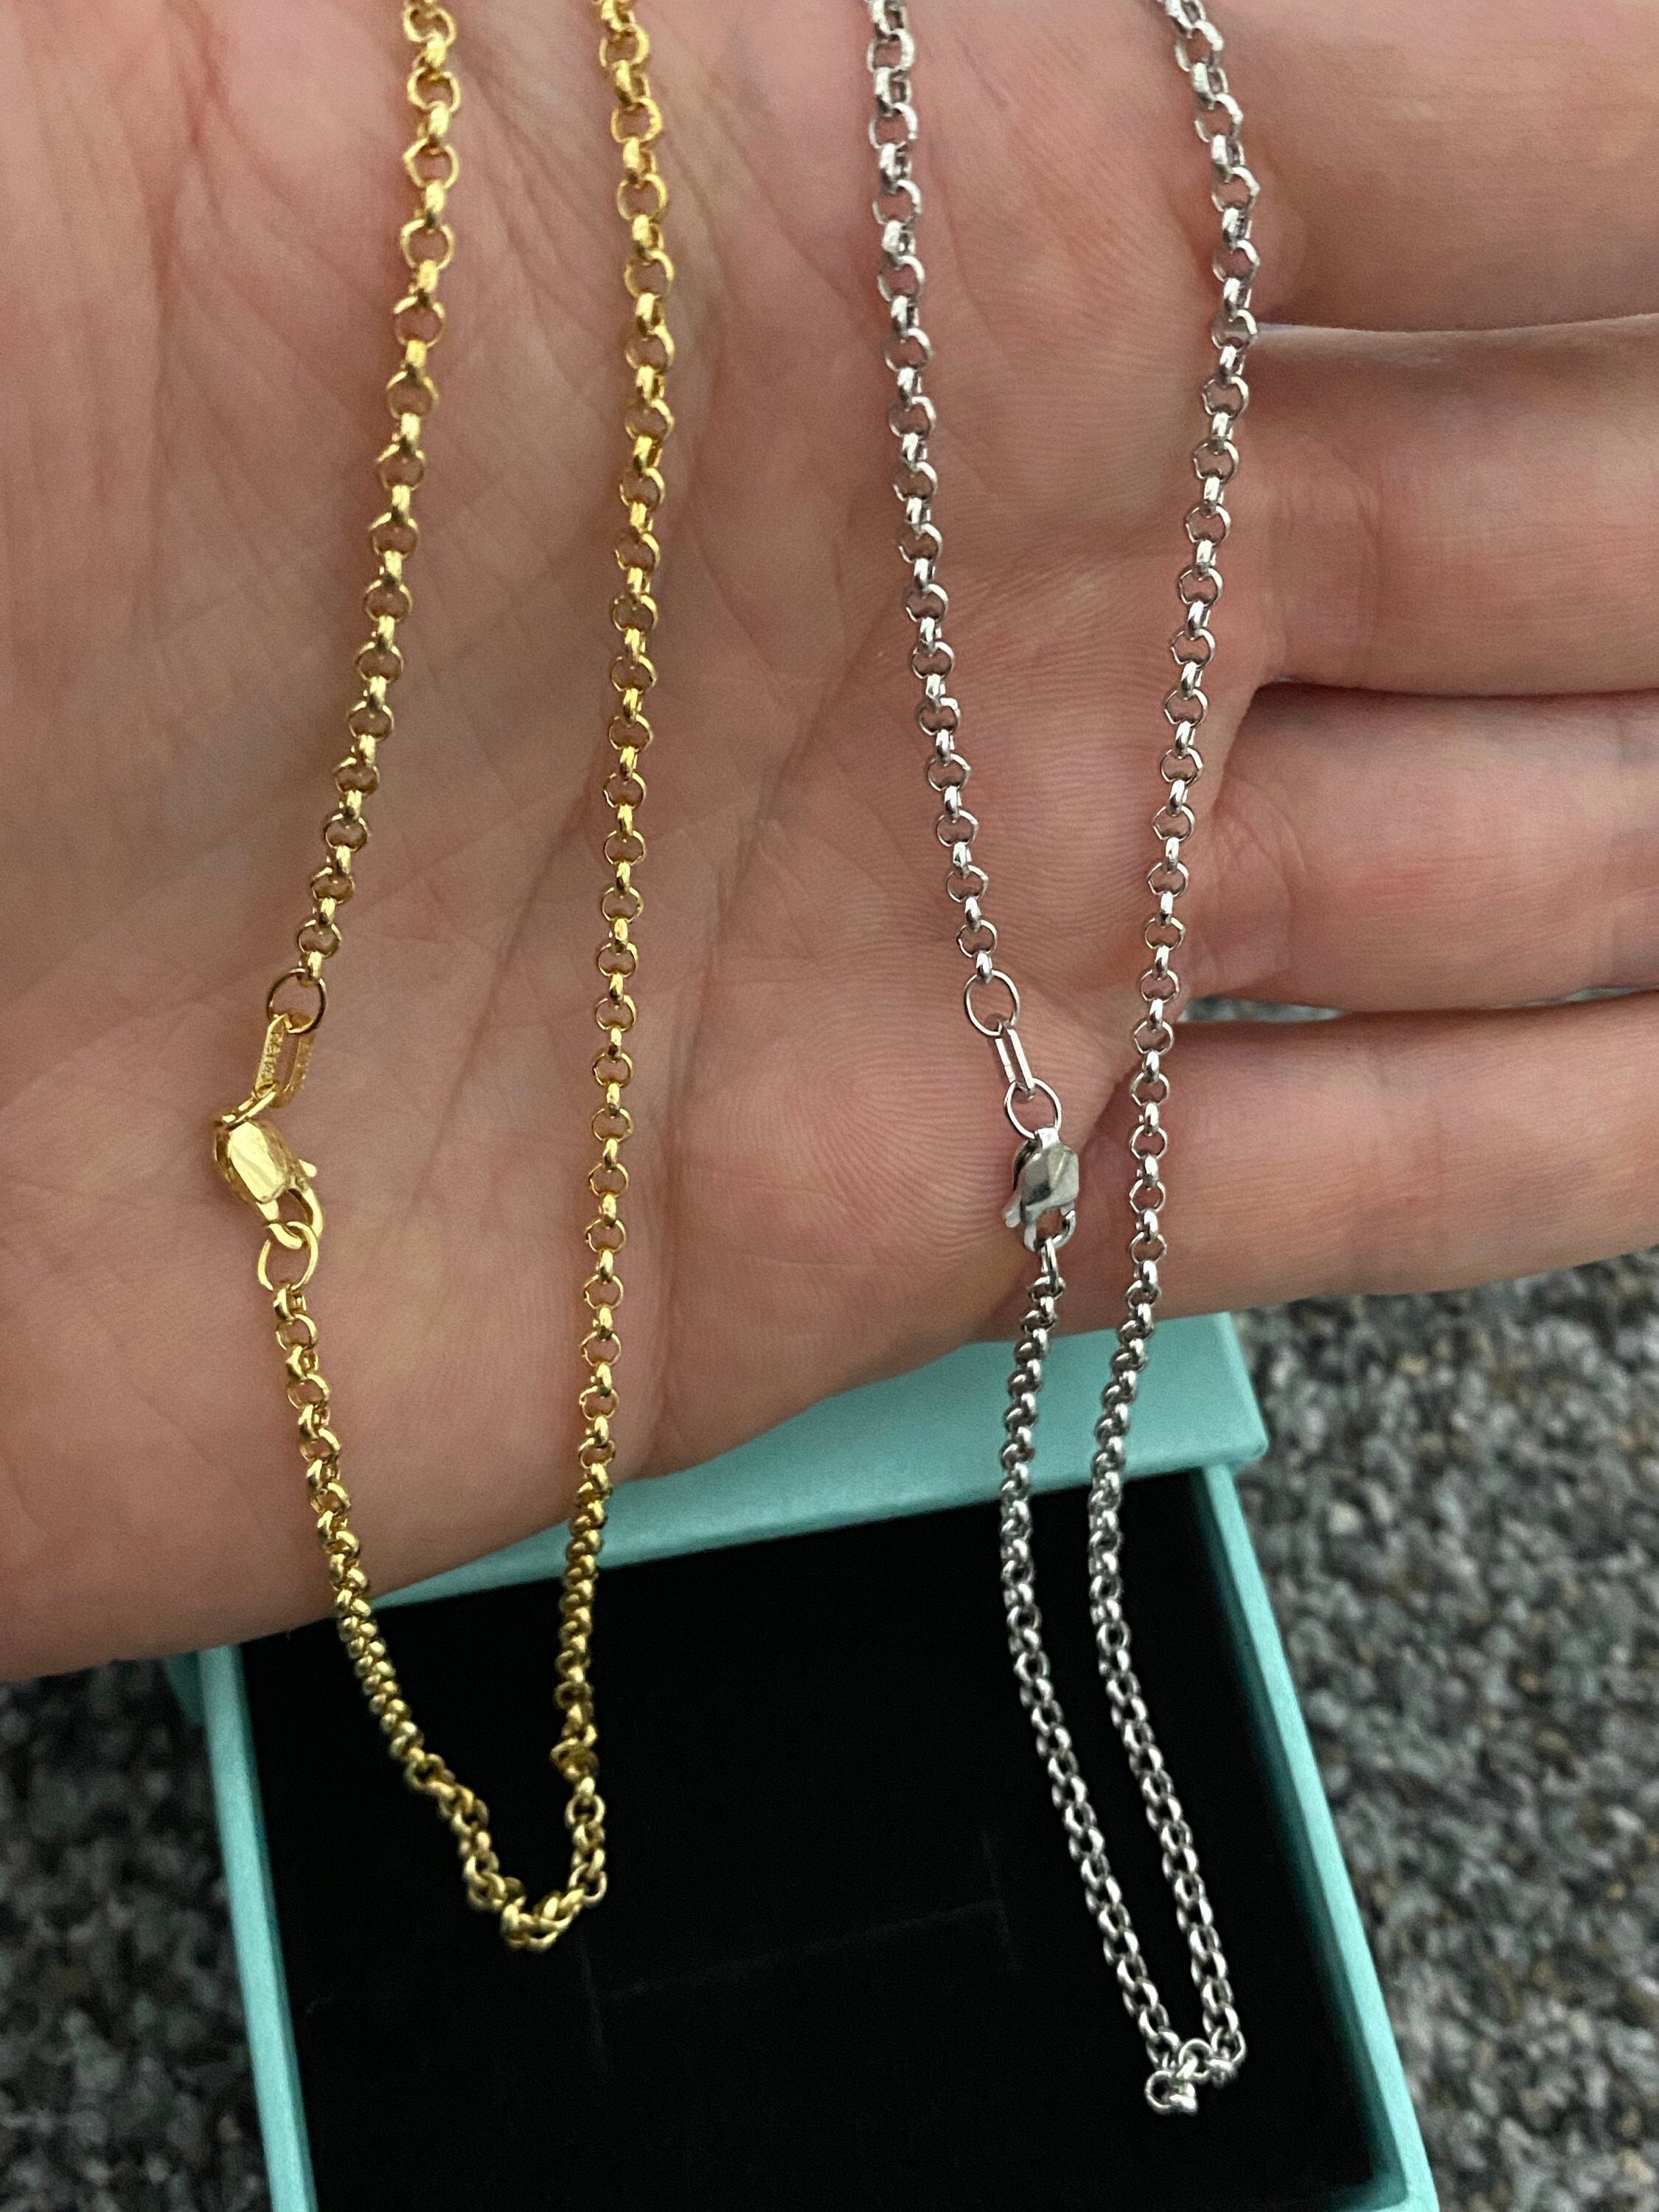 2MM Stainless steel chain necklace, Thin cable chain necklace for women  men, Silver chains for necklace alone or pendant addition, 16-30 inch